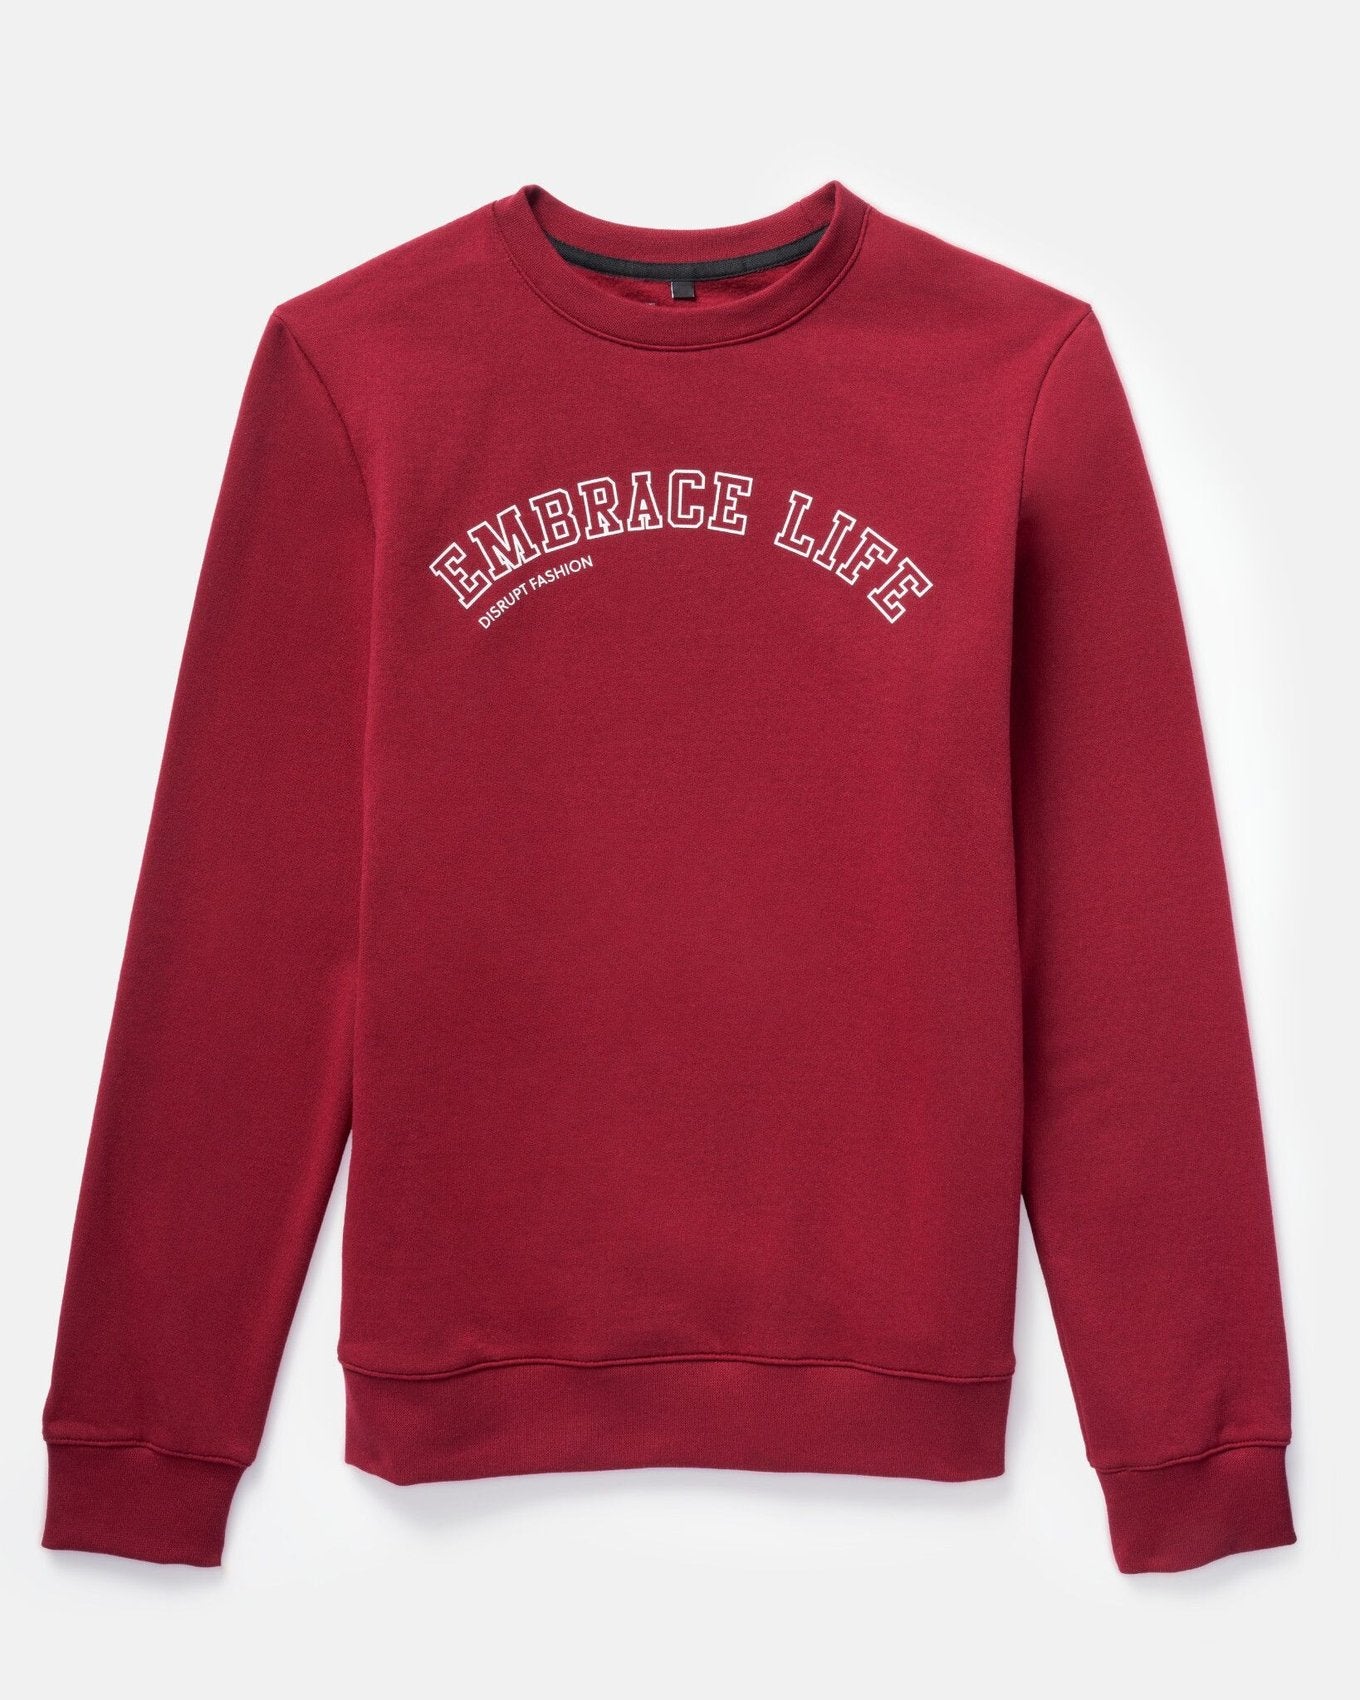 ReApparel Embrace Crew Neck . in color Garnet and shape long sleeve